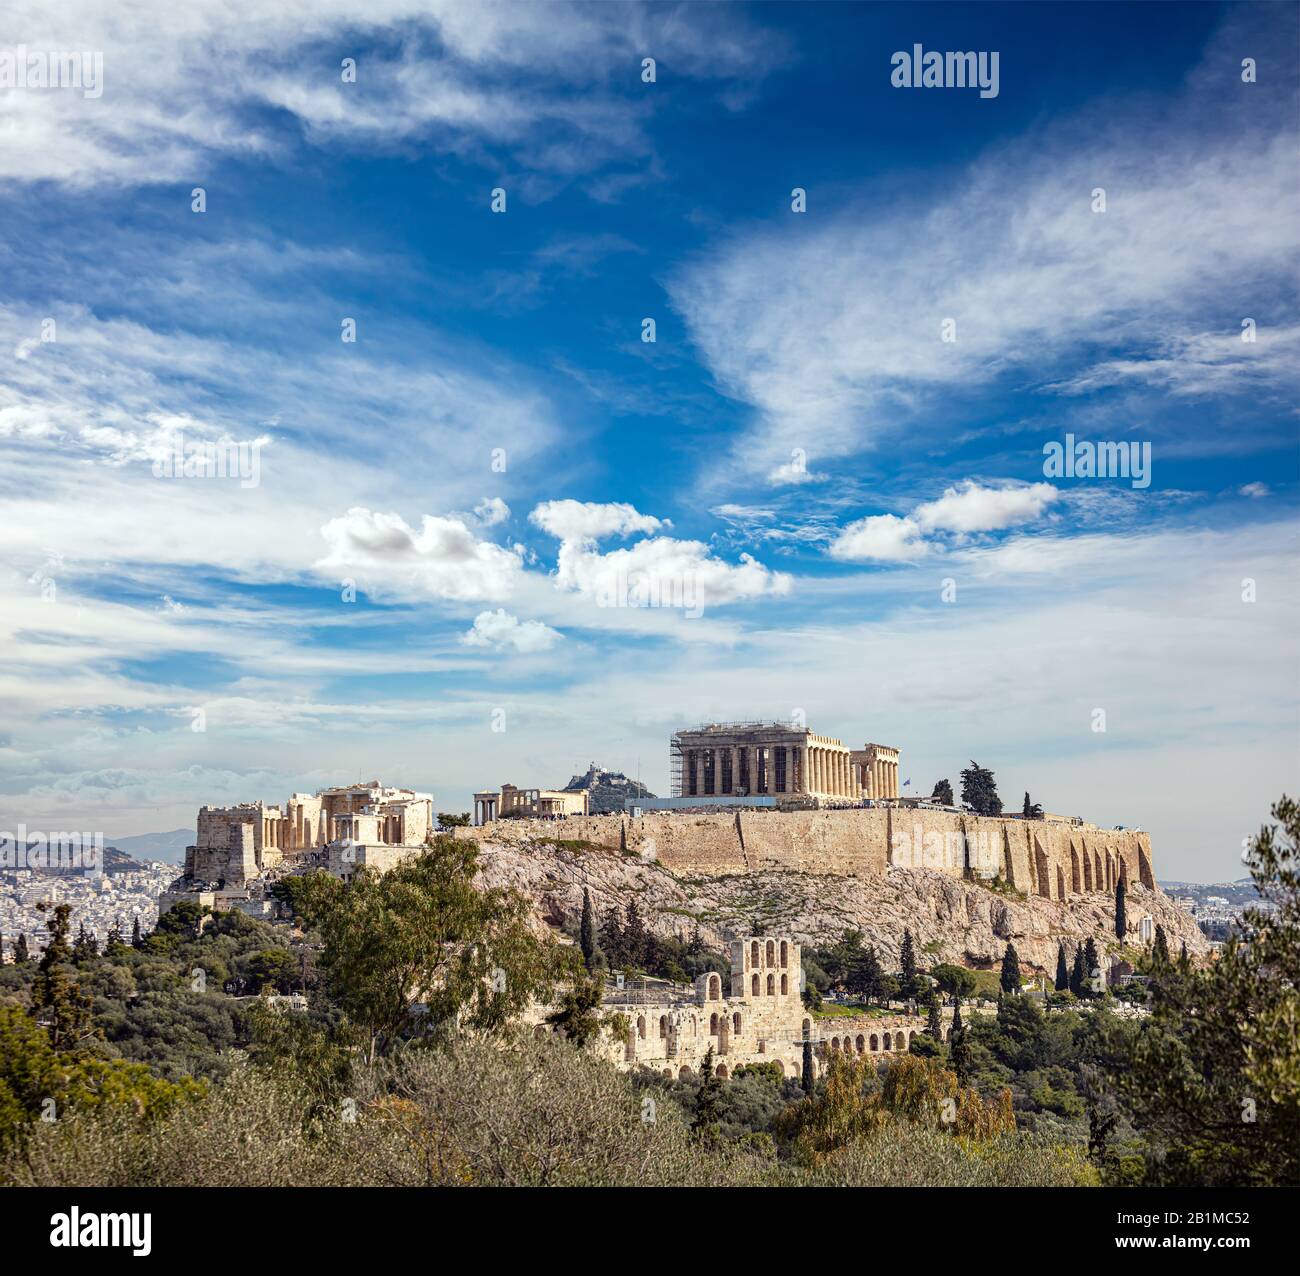 Athens, Greece. Acropolis and Parthenon temple, top landmark. Scenic view of ancient Greece remains from Philopappos or Filopappos Hill cloudy blue sk Stock Photo